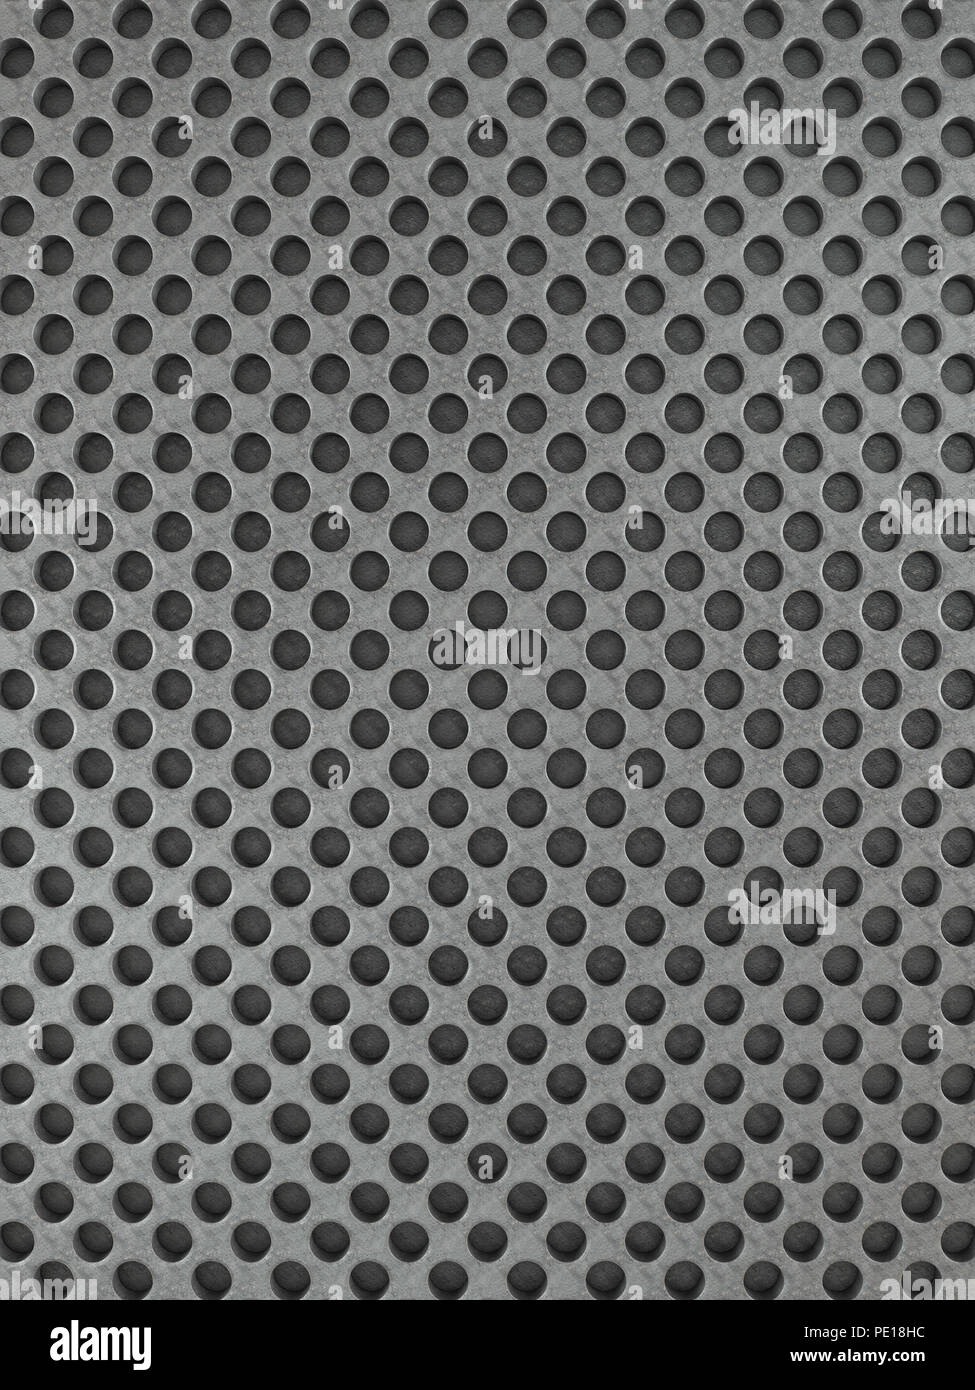 Metal grid with round holes pattern background. 3D illustration Stock Photo  - Alamy